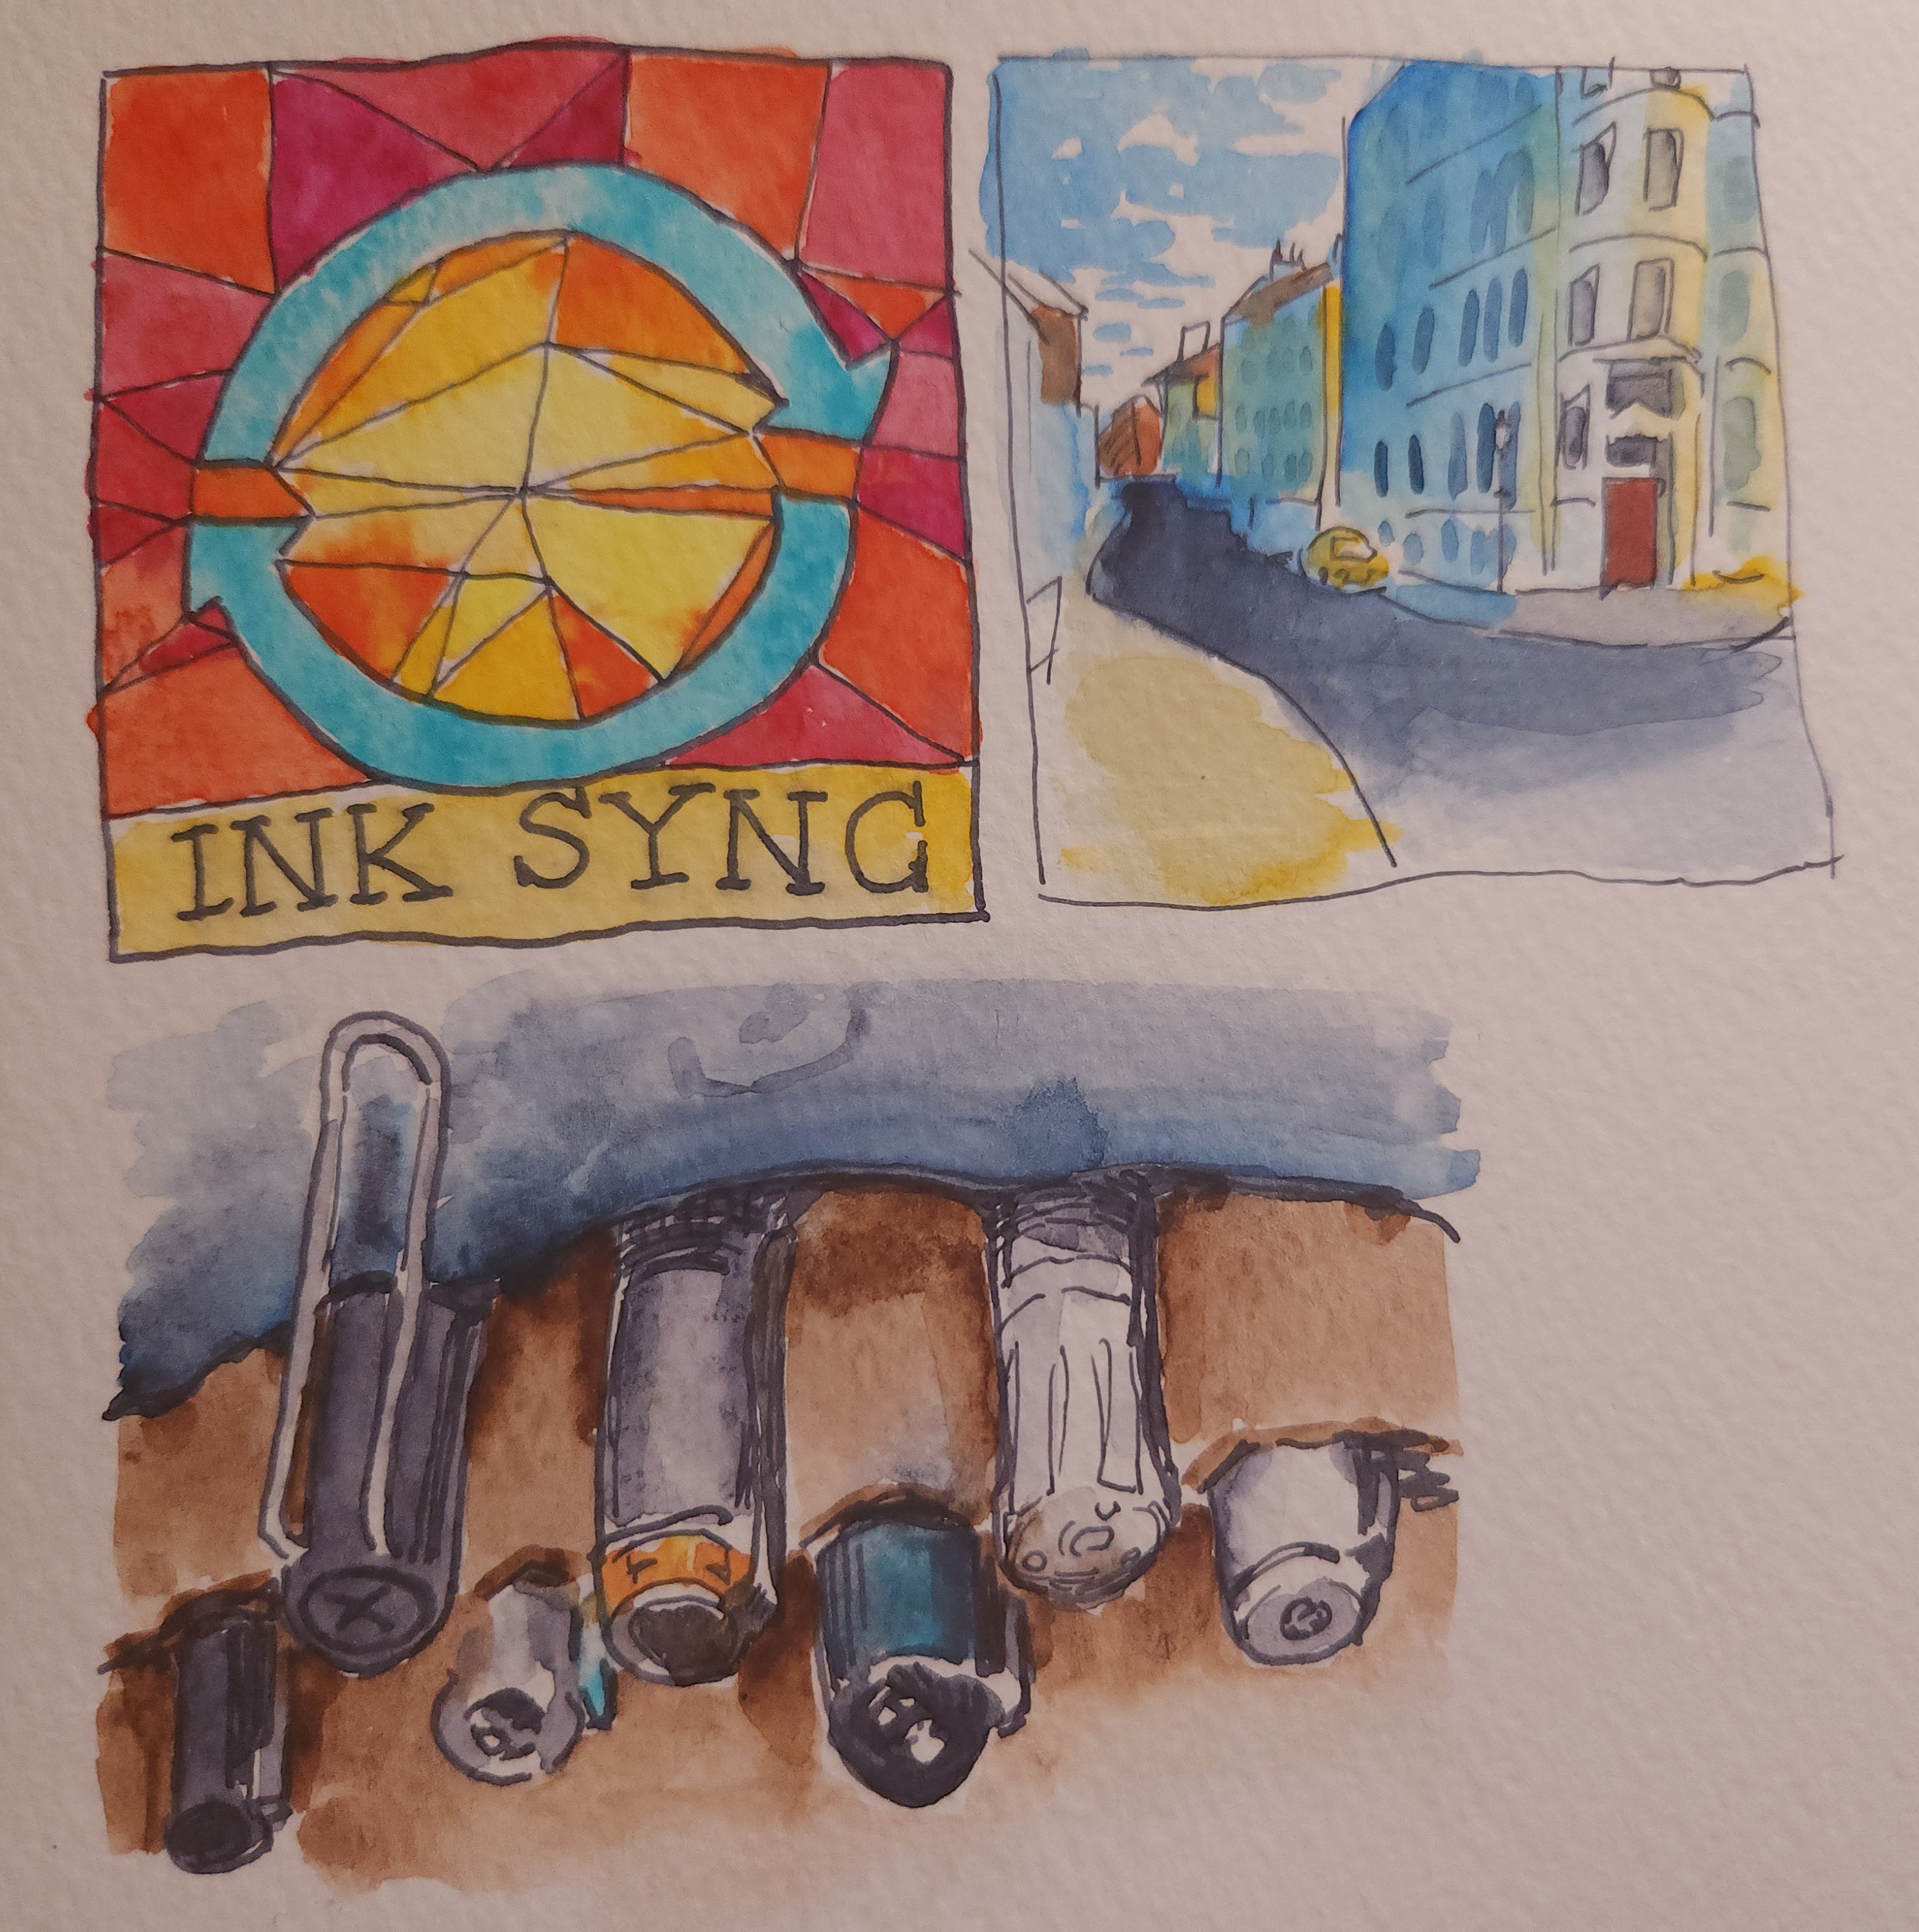 A version of the website logo, a sketch from a photo I took, and&hellip; fountain pens!